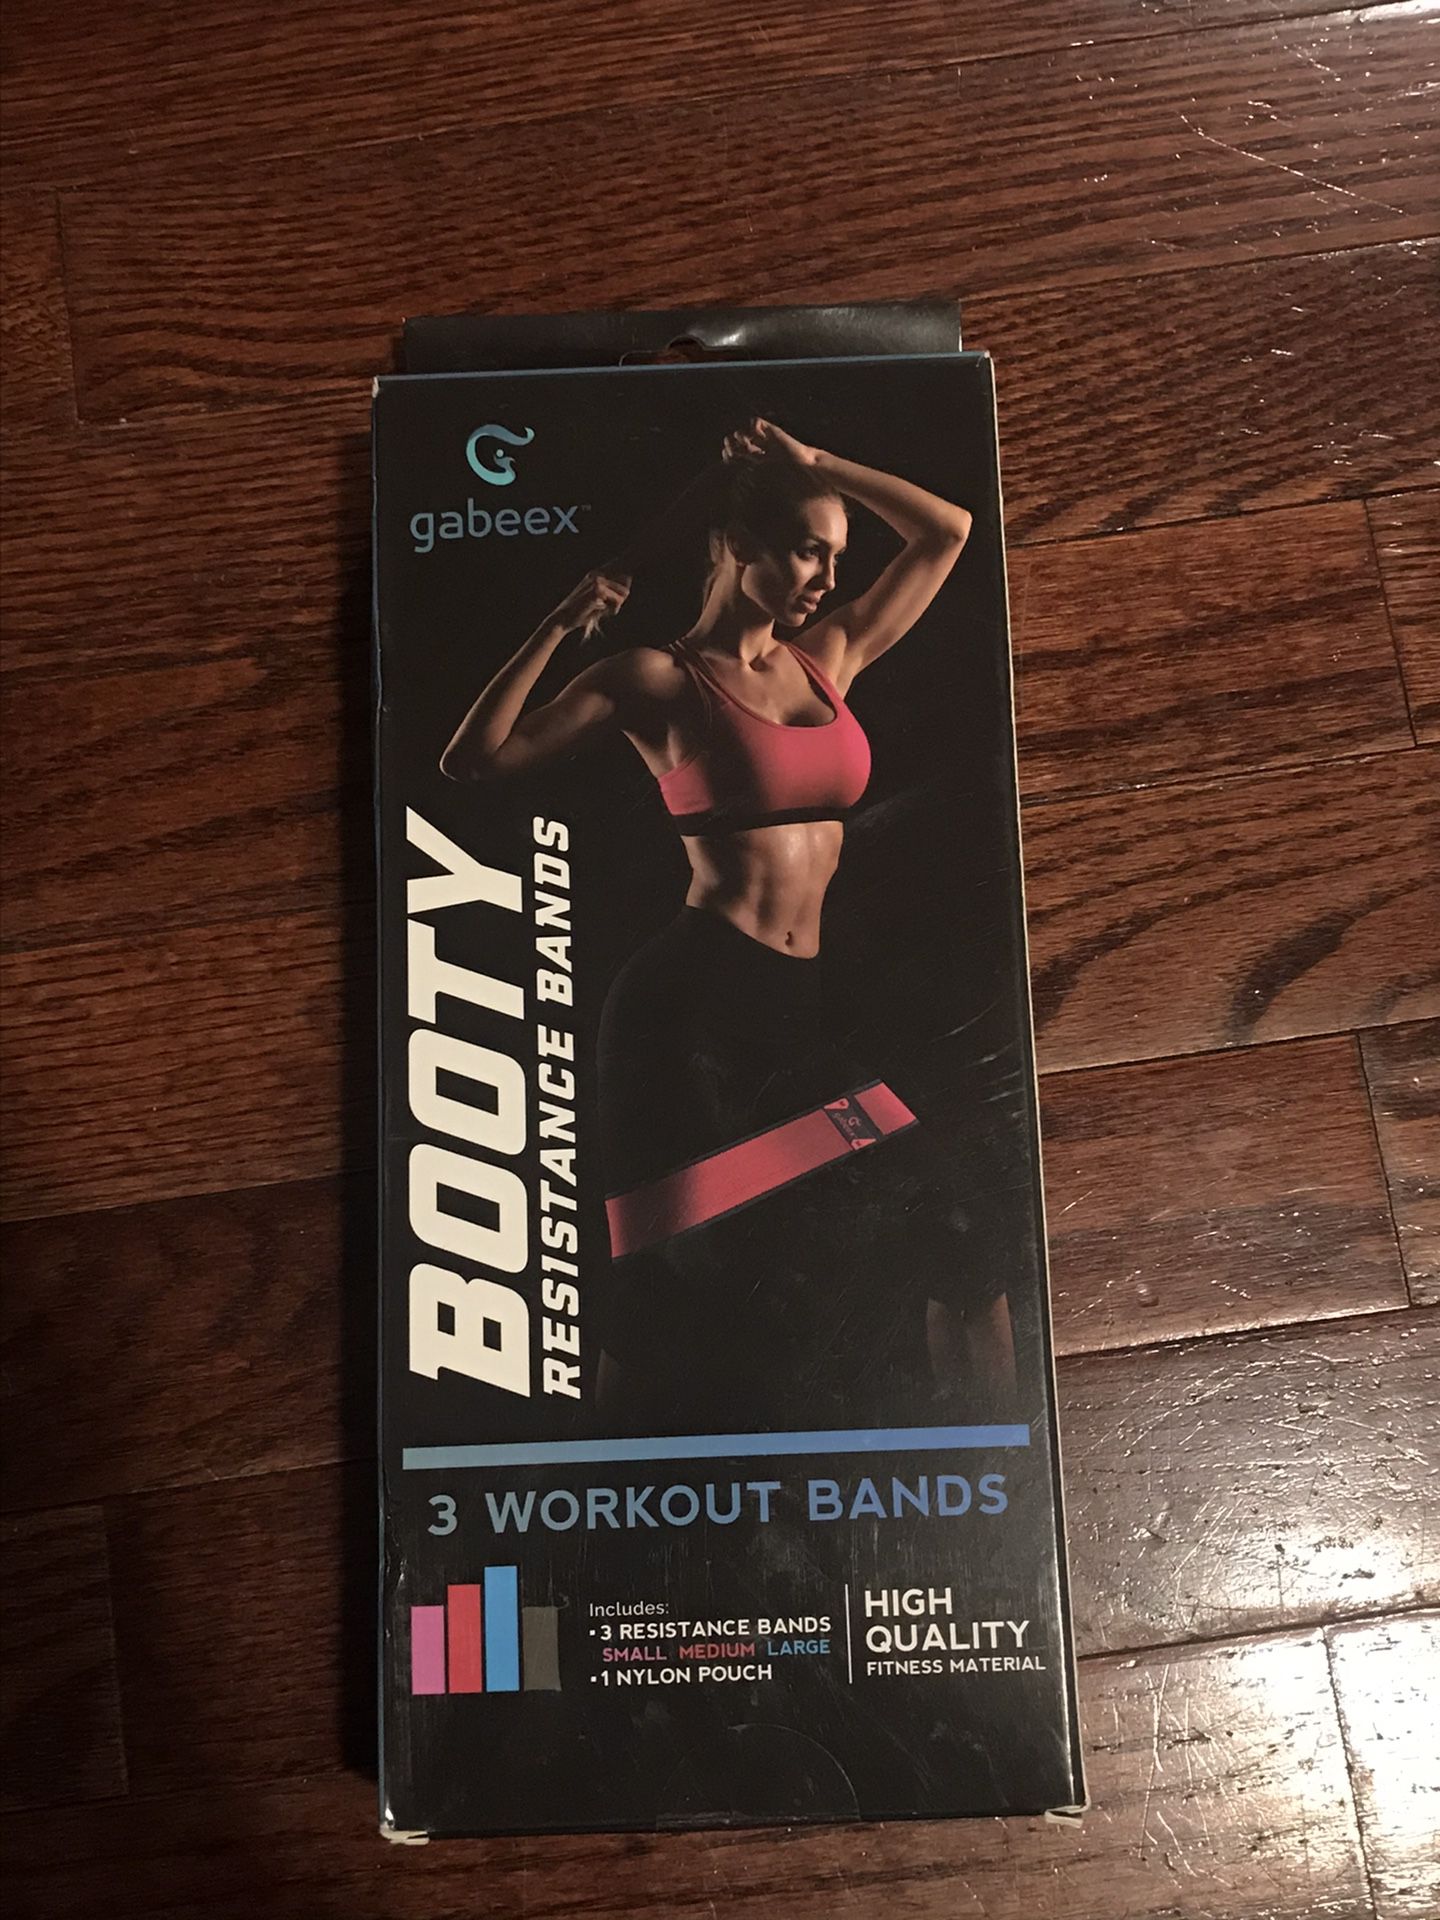 Booty Fitness Resistance Bands 3 Workout Bands included